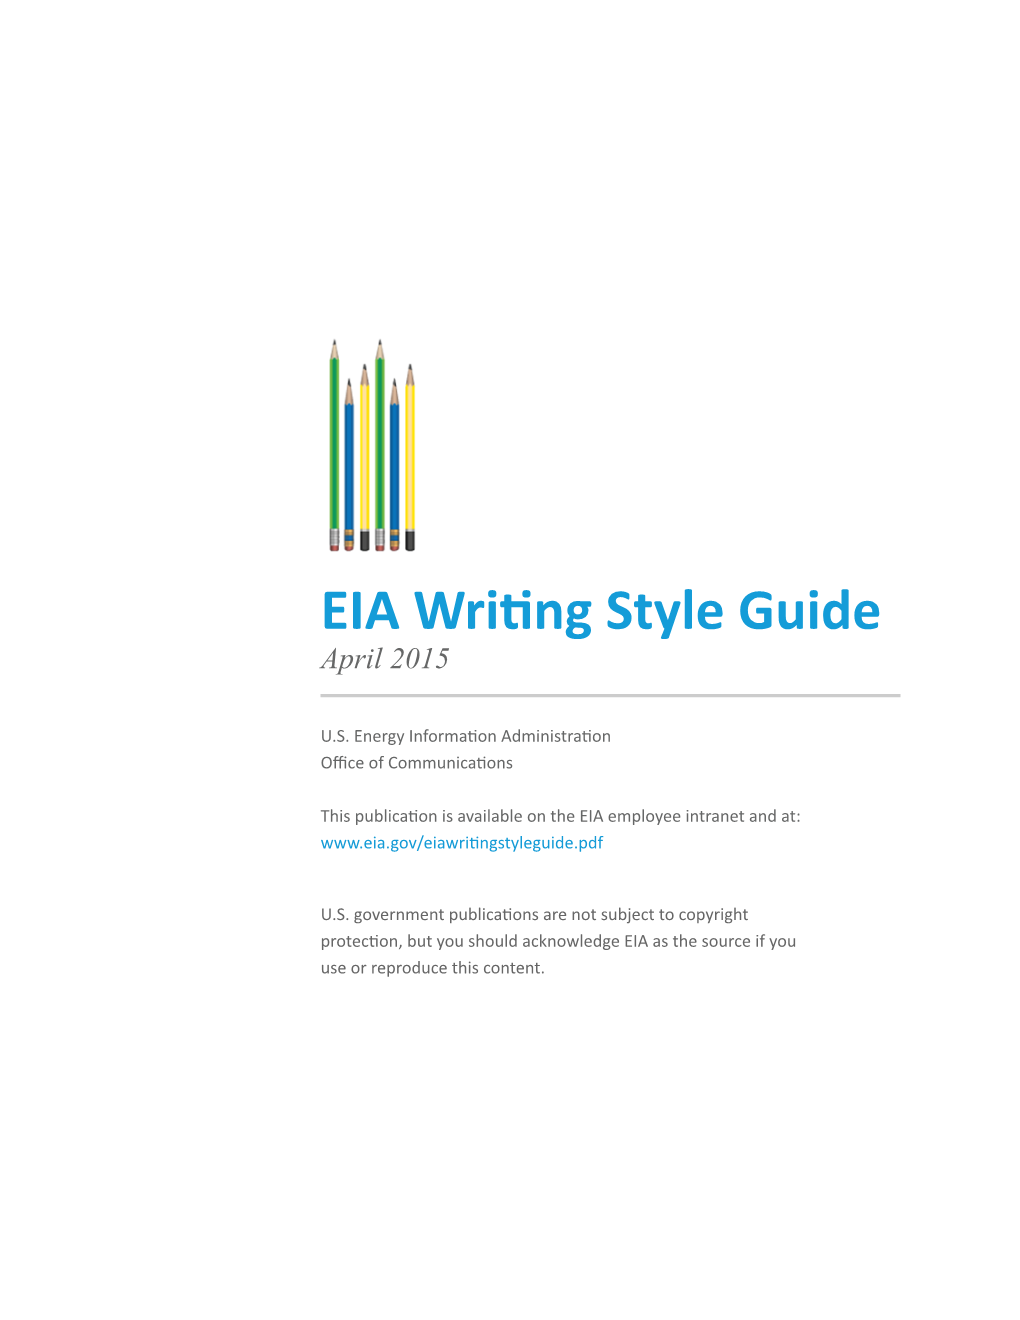 EIA Writing Style Guide April 2015